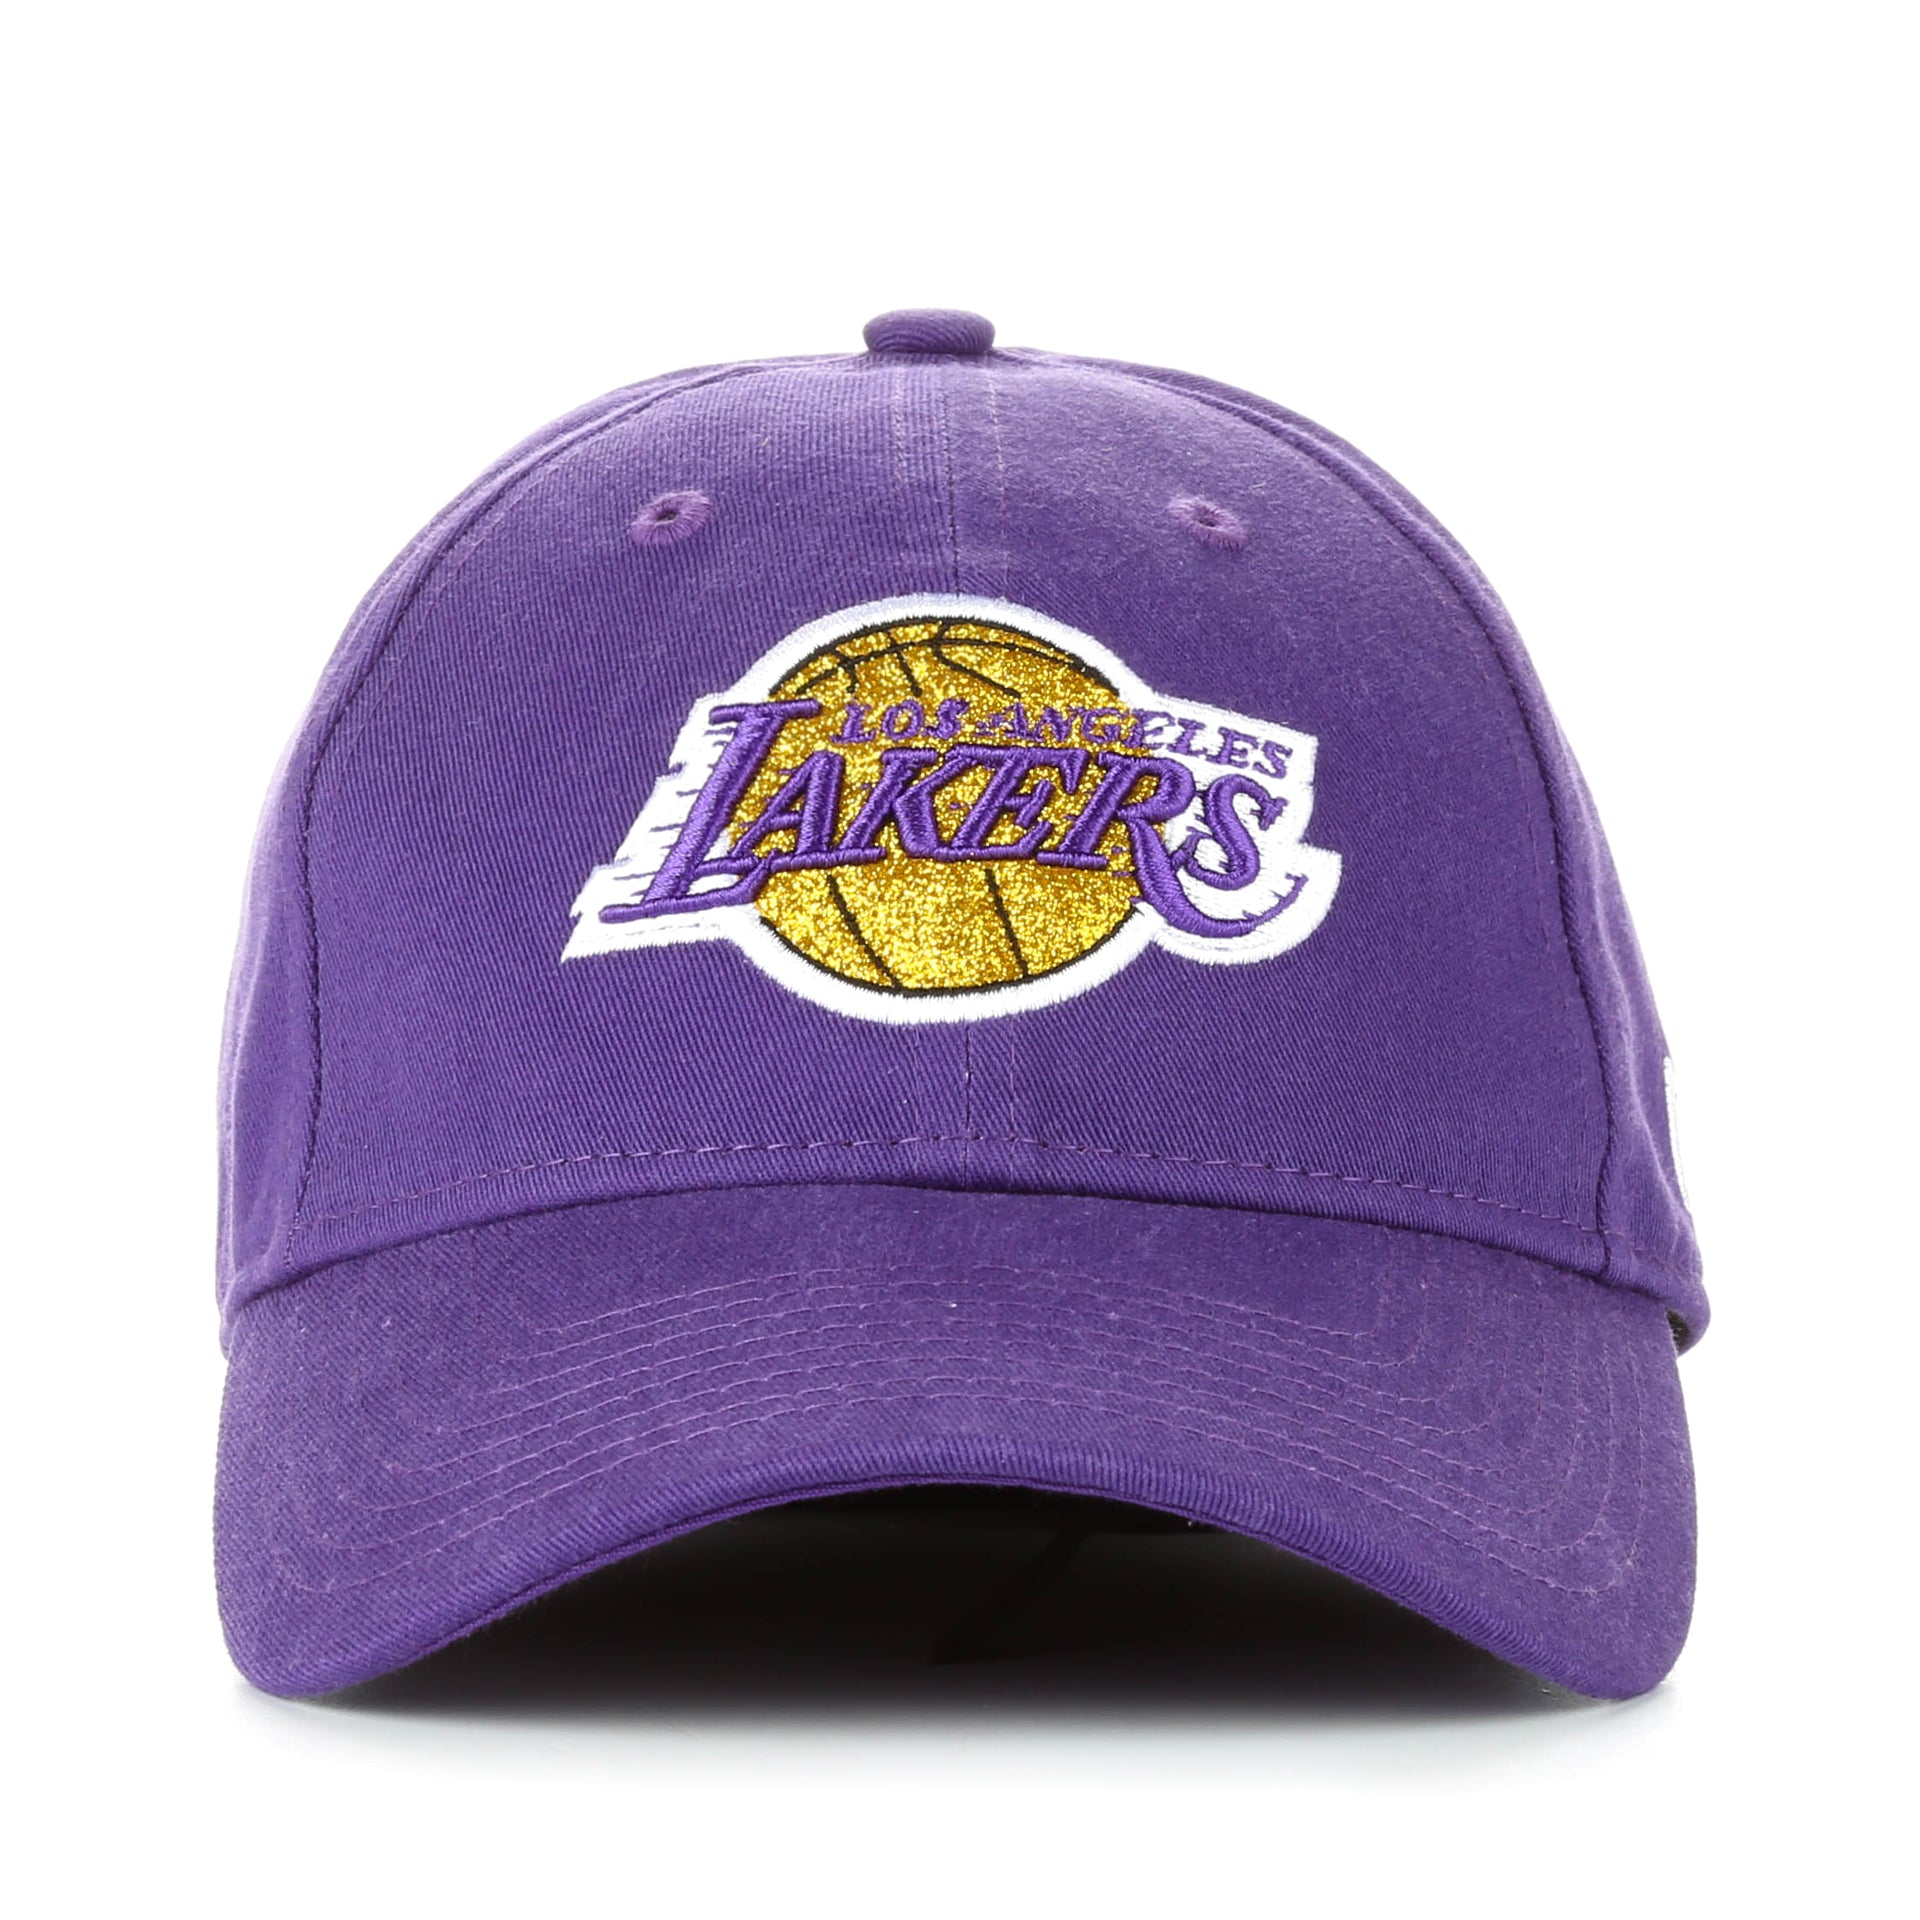 New Era Lakers My First 920 Infant in Purple/Yellow Size XXS | WSS